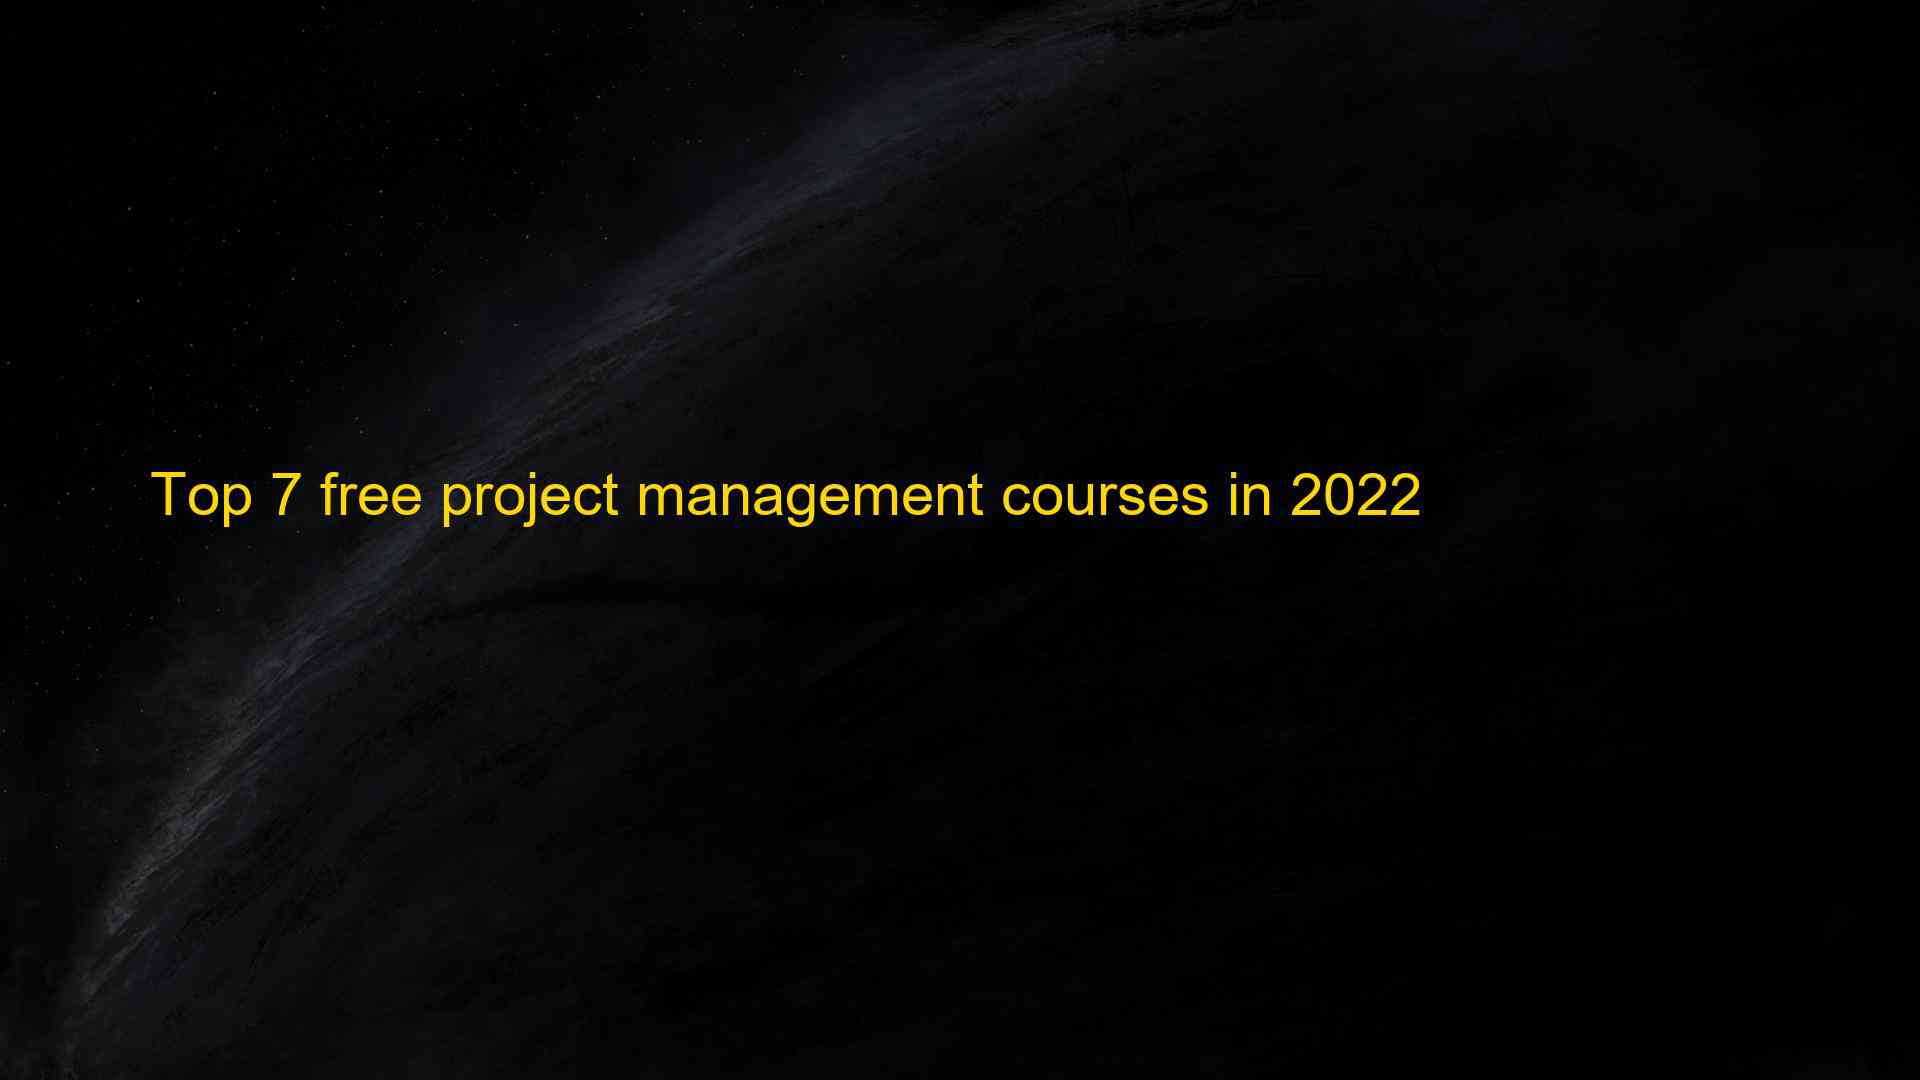 Top 7 free project management courses in 2022 1660913343